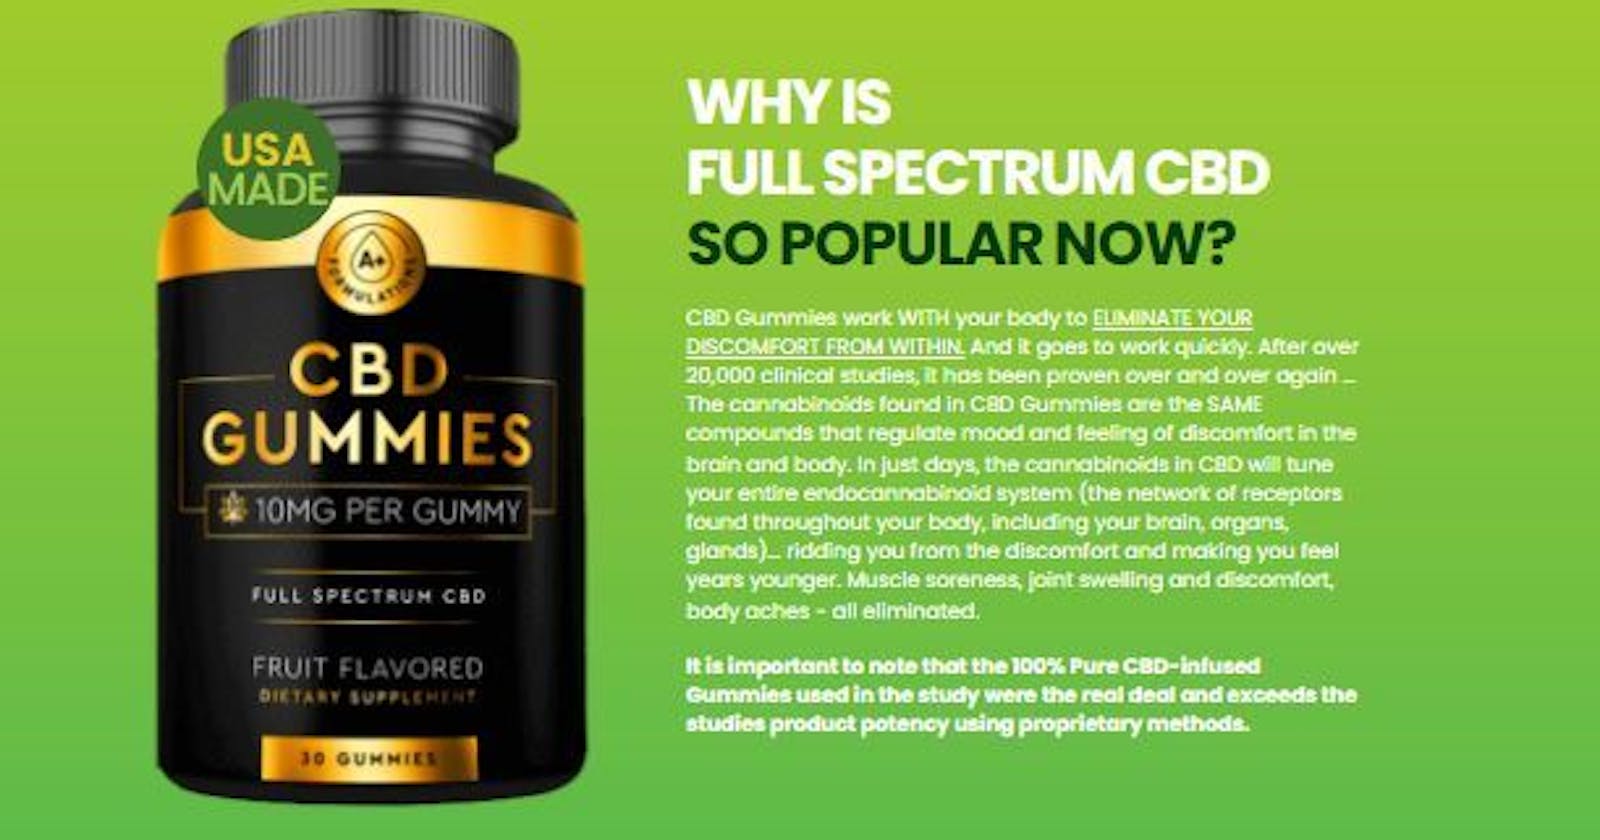 A+ Formulations CBD Gummies - Mindful Relaxation and Focus!